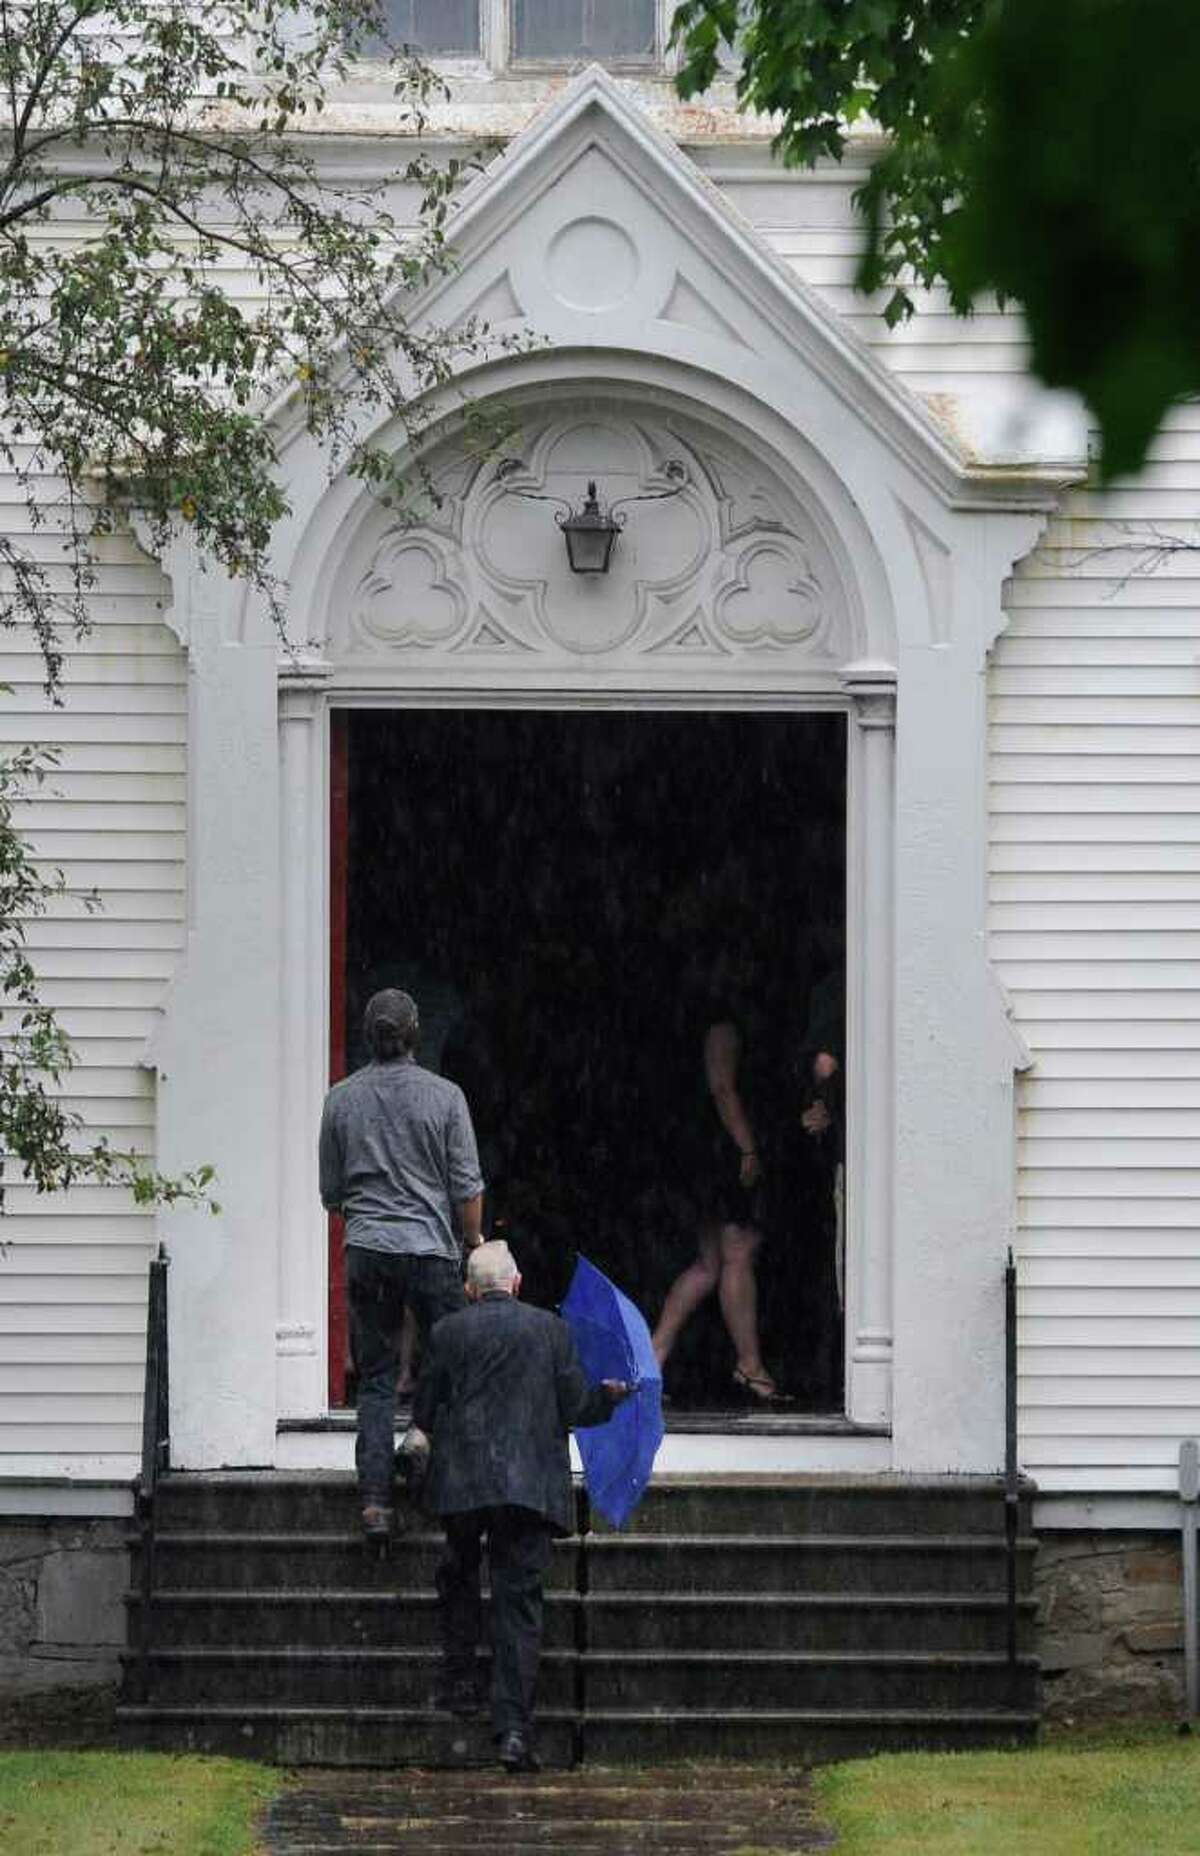 Mourners enter the Cambridge United Presbyterian Church in Cambridge, N.Y. July 18, 2011, to attend the funeral of Dan Harrington, Deputy Town Highway Superintendent for the Town of White Creek, his wife Lisa Harrington and step son Josh O'Brien who were shot to death and their bodies burned allegedly by their son Mathew Slocum. (Skip Dickstein / Times Union)